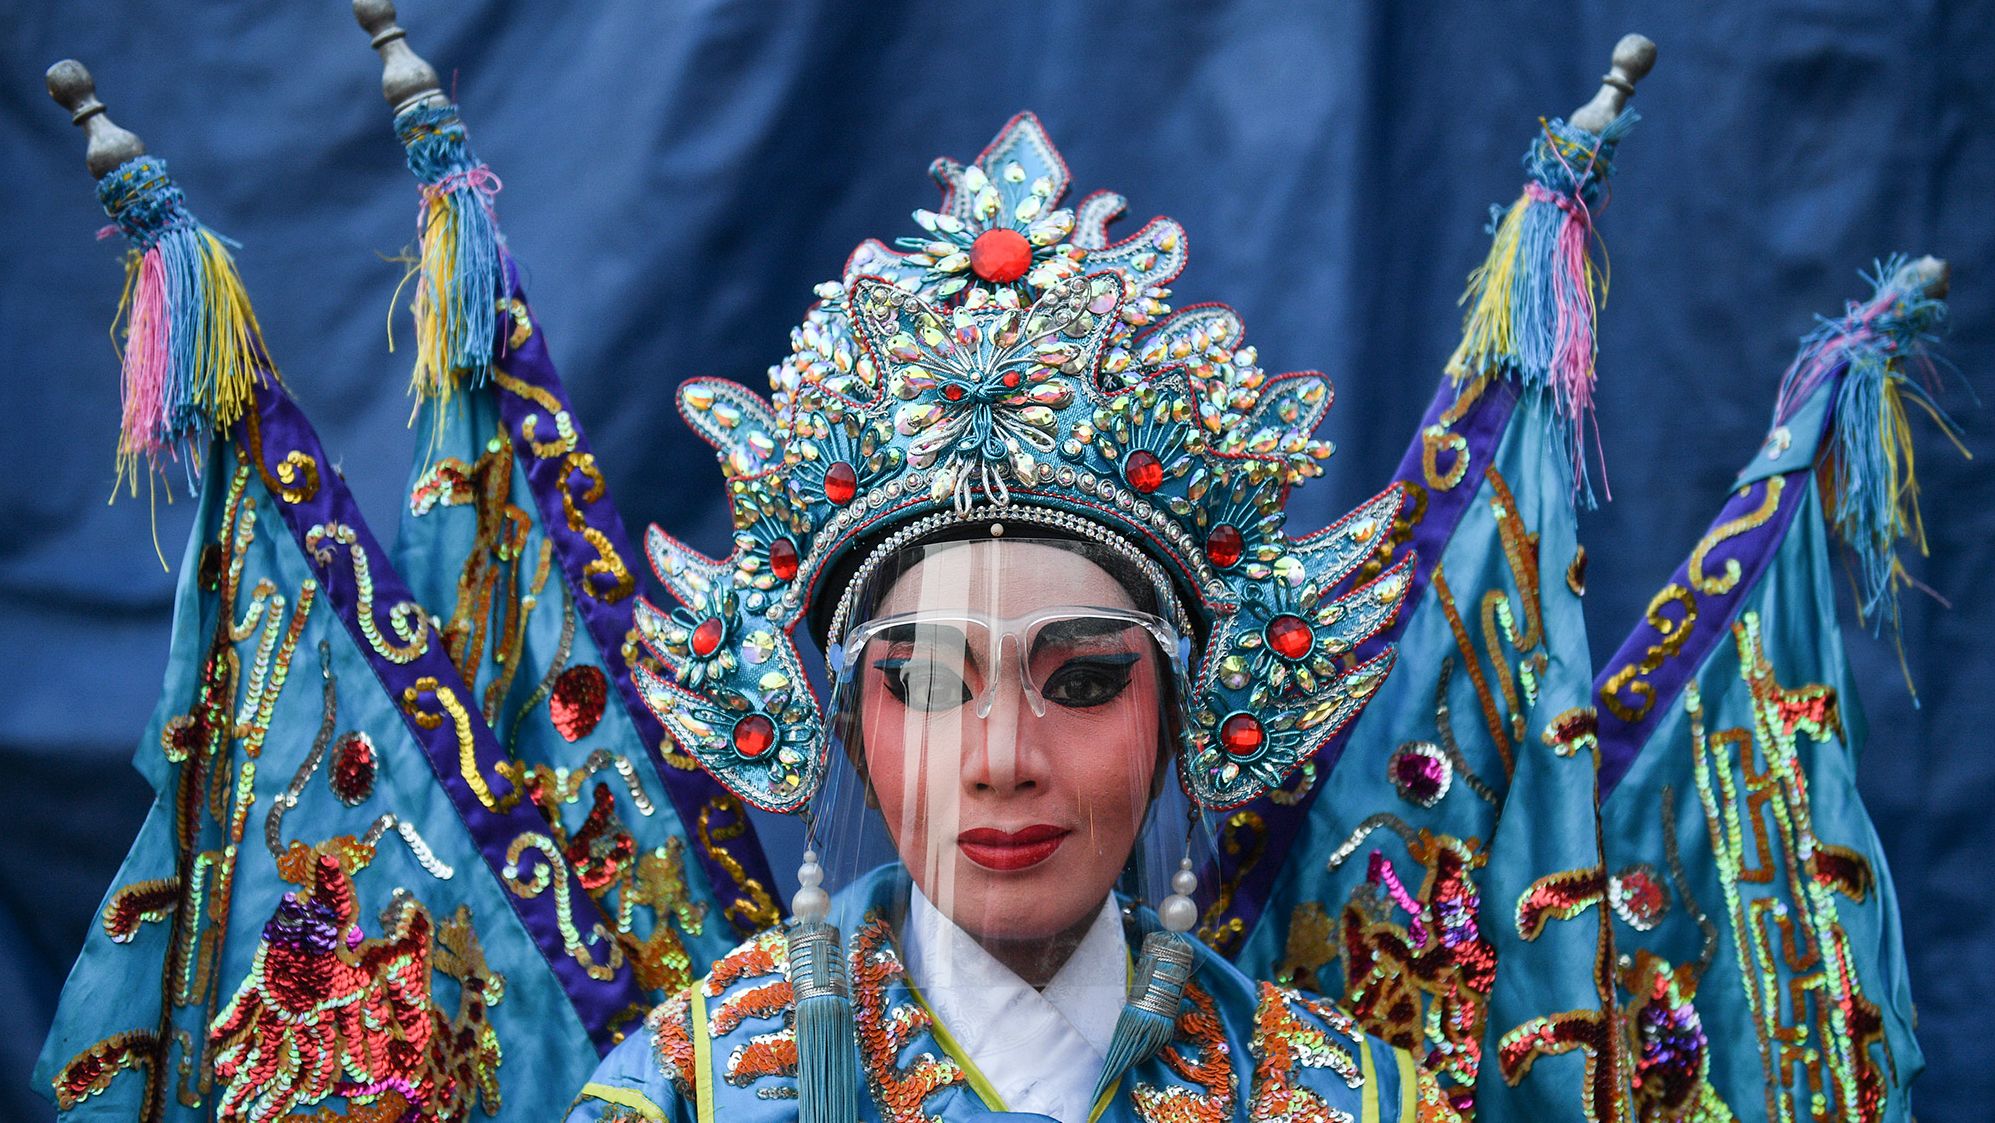 <strong>Chalinee Thirasupa, based in Bangkok, Thailand:</strong> A traditional Chinese Opera performer gets ready before a live performance, on the evening of Lunar New Year in Bangkok, Thailand.  <br /> <br />The opera has long been a colorful staple of Bangkok life. The ancient art form, combining literature and musical performance, is one of the oldest performance arts in the world, with roots going back to the Tang Dynasty.  <br /> <br />The day I took the picture was the very first time the Thai government allowed public performances with social distancing and Covid-19 safety procedures. Everyone had to wear face shields and follow all the protocols but participated in order to survive the financial crisis, because there had been no work for them for about a year.  <br /> <br />We cannot escape the endless war against the pandemic, our lives will never ever be the same. However, we're learning to live with it instead and go on in order to survive.  